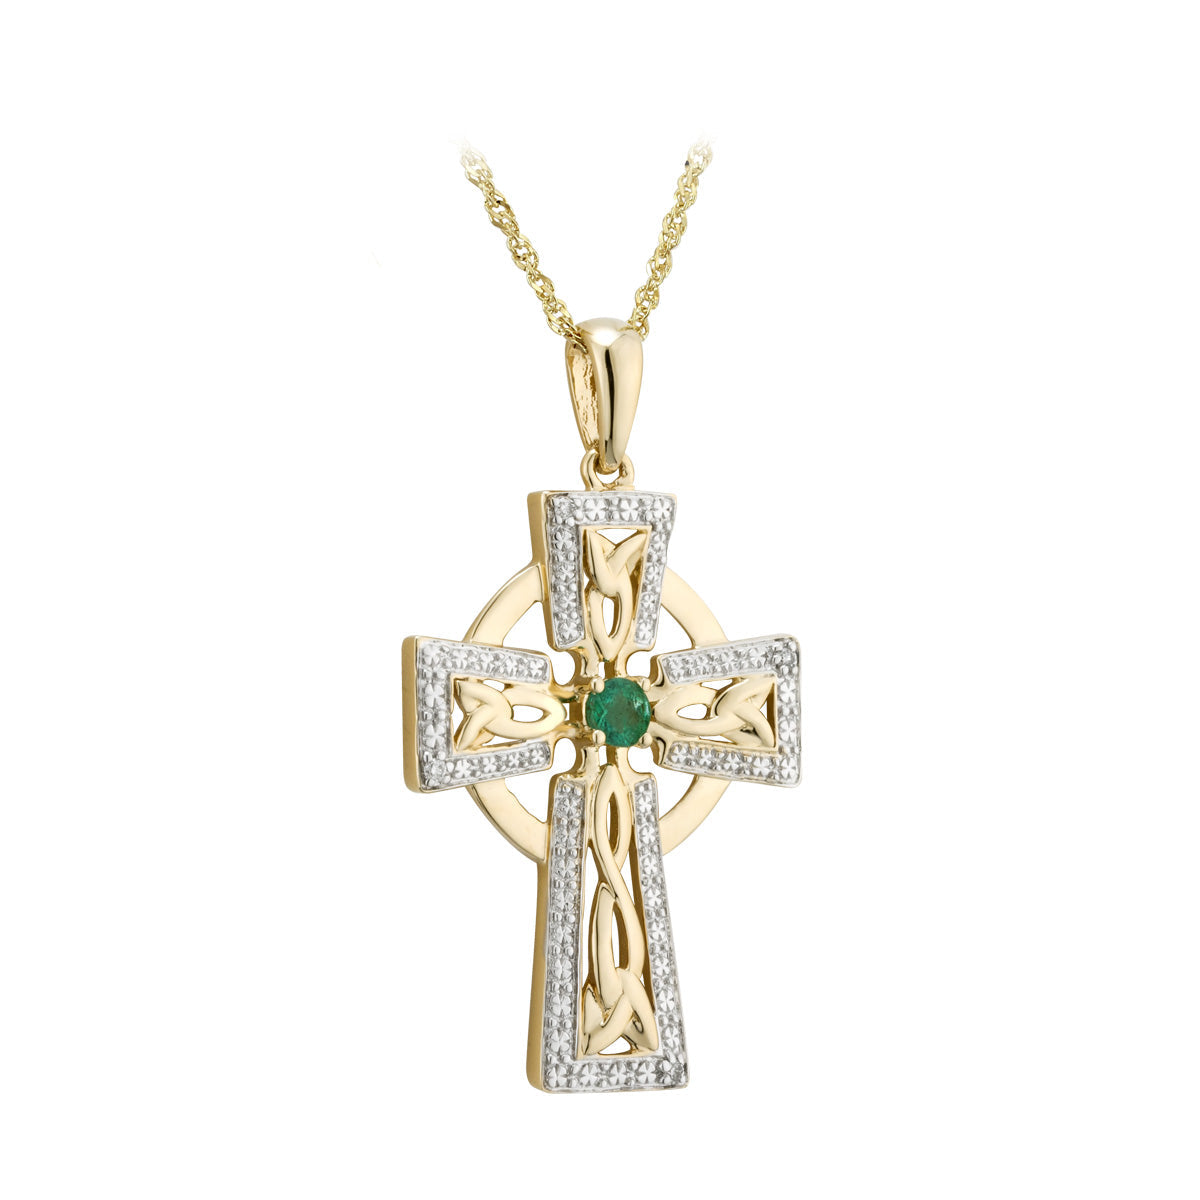 14k gold diamond and emerald cross necklace s46103 from Solvar